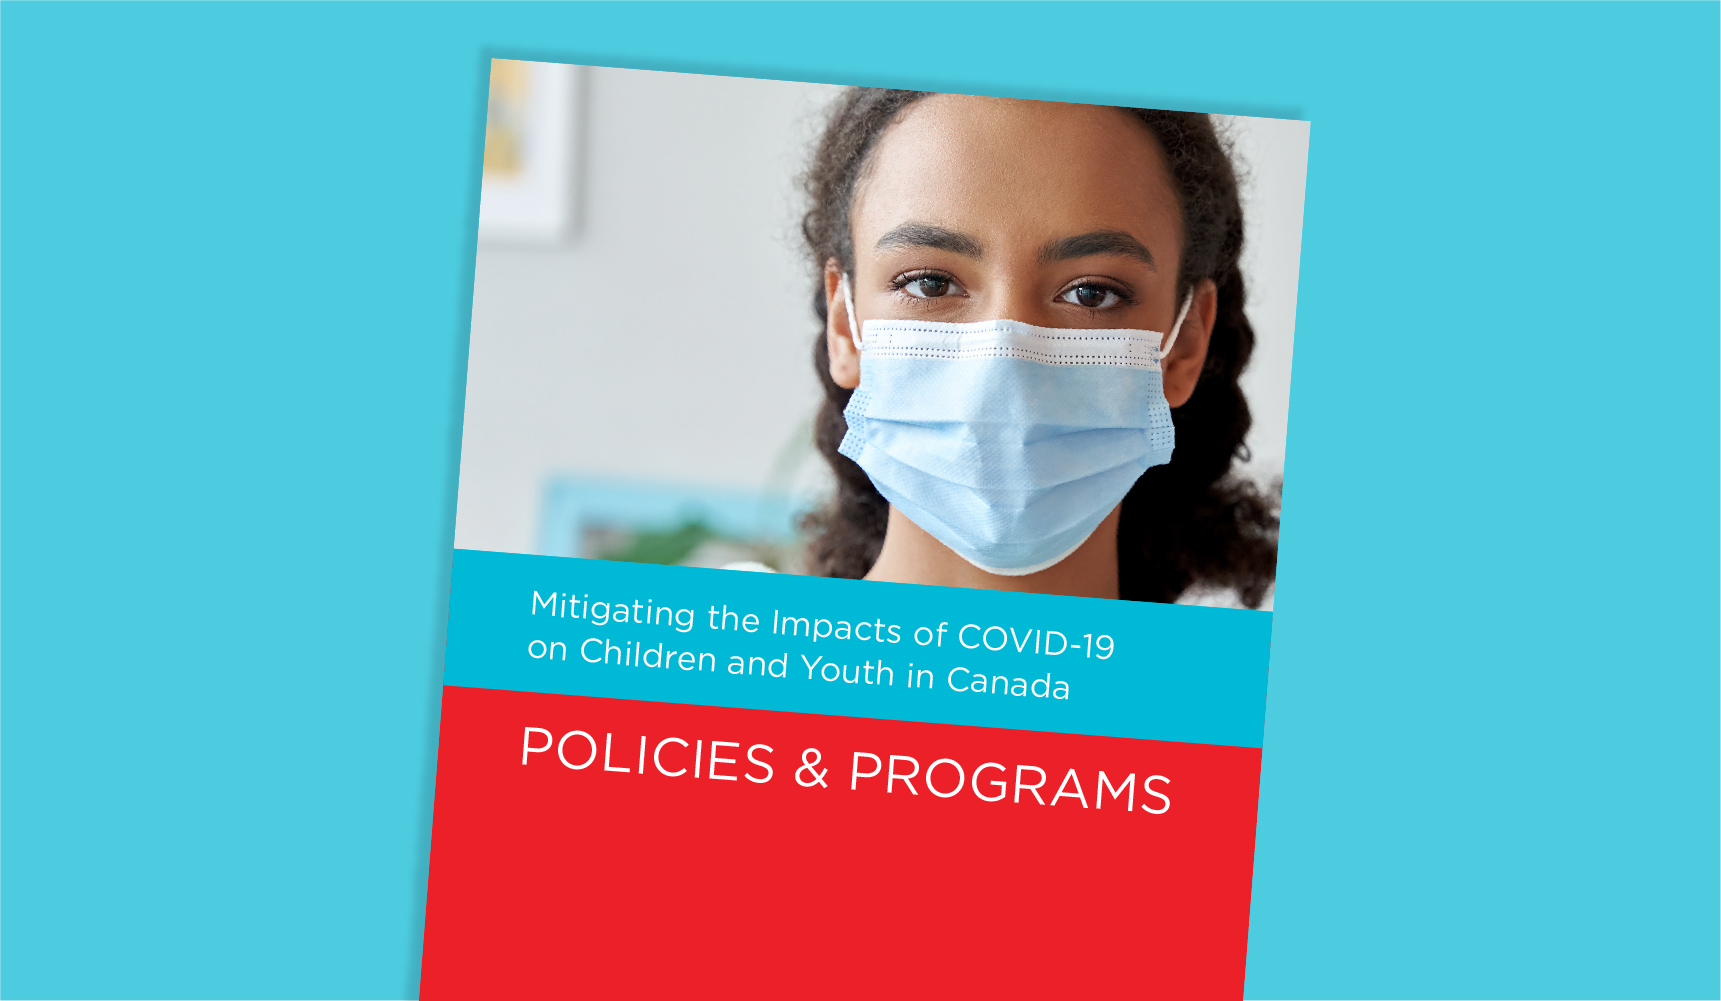 New policy and program resource to mitigate the impacts of COVID-19 on kids